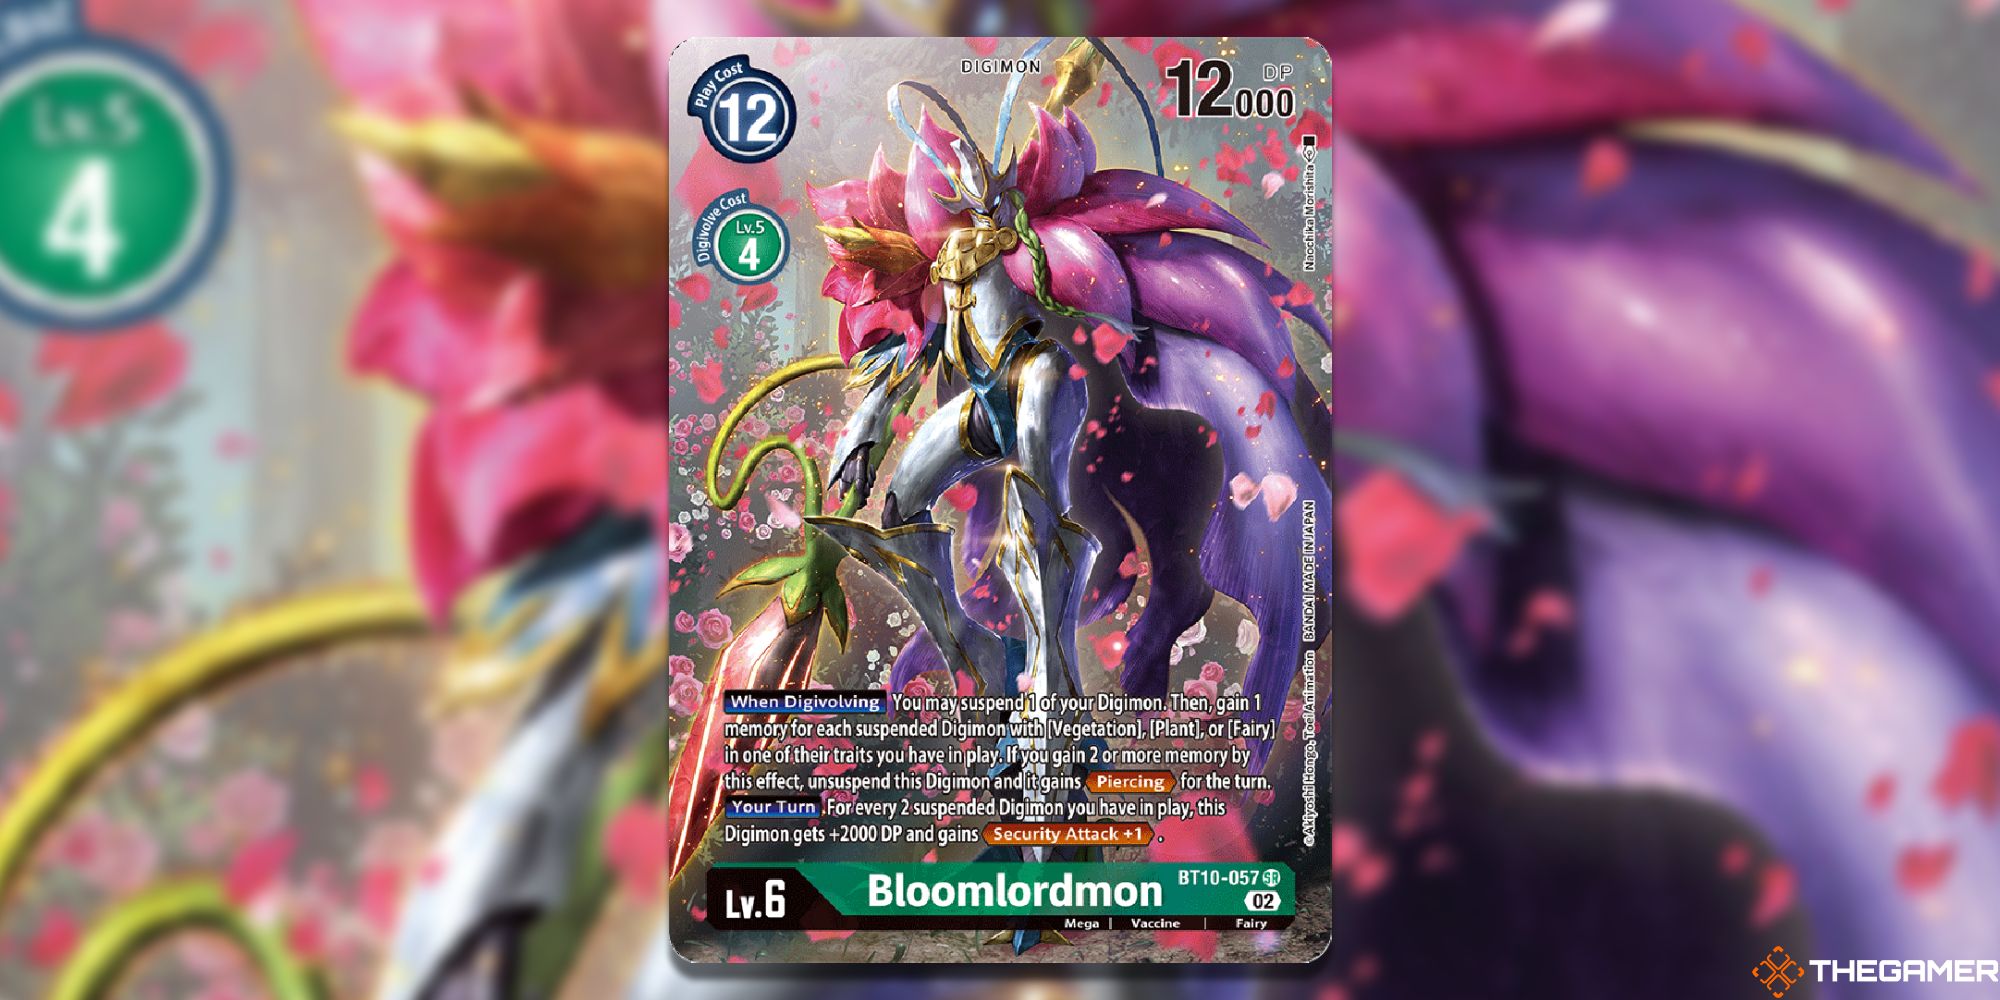 bloomlordmon alt art card from digimon card game with blur background